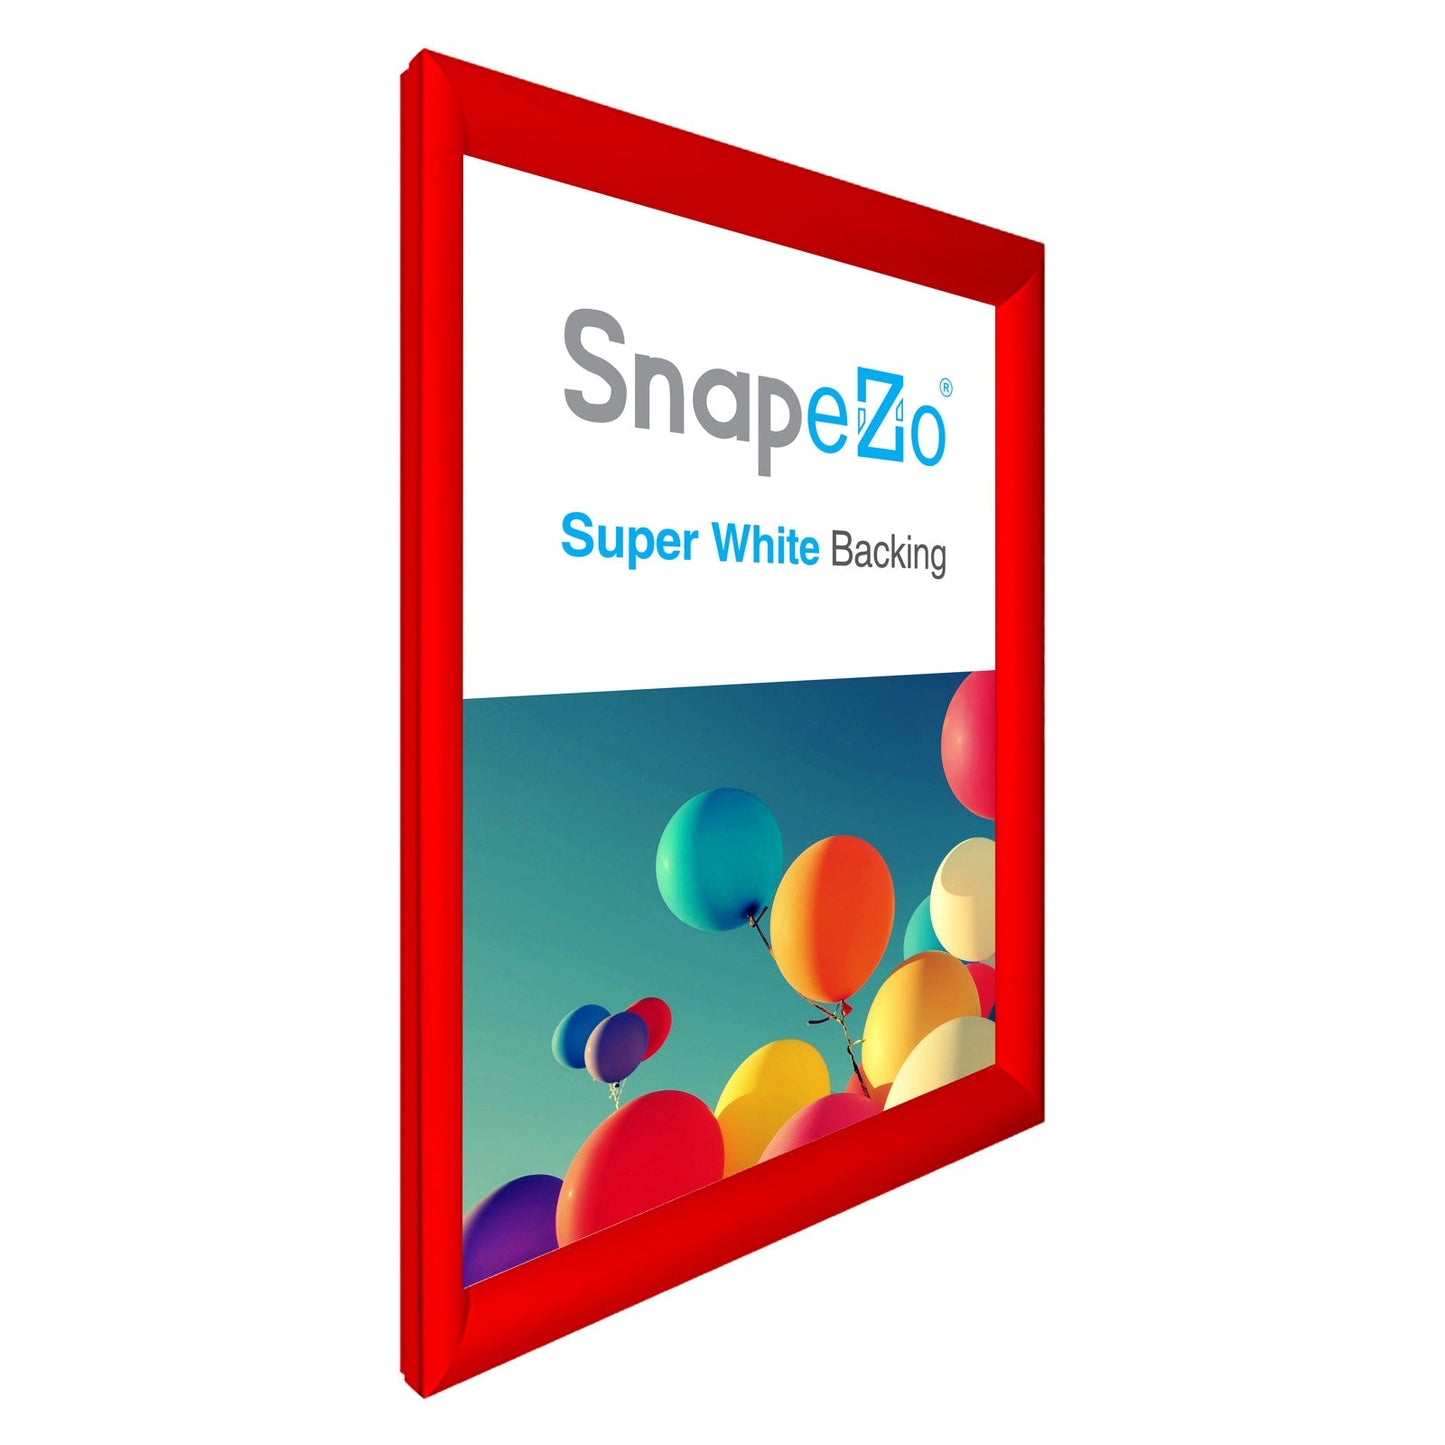 28x40 Red SnapeZo® Snap Frame - 1.2" Profile